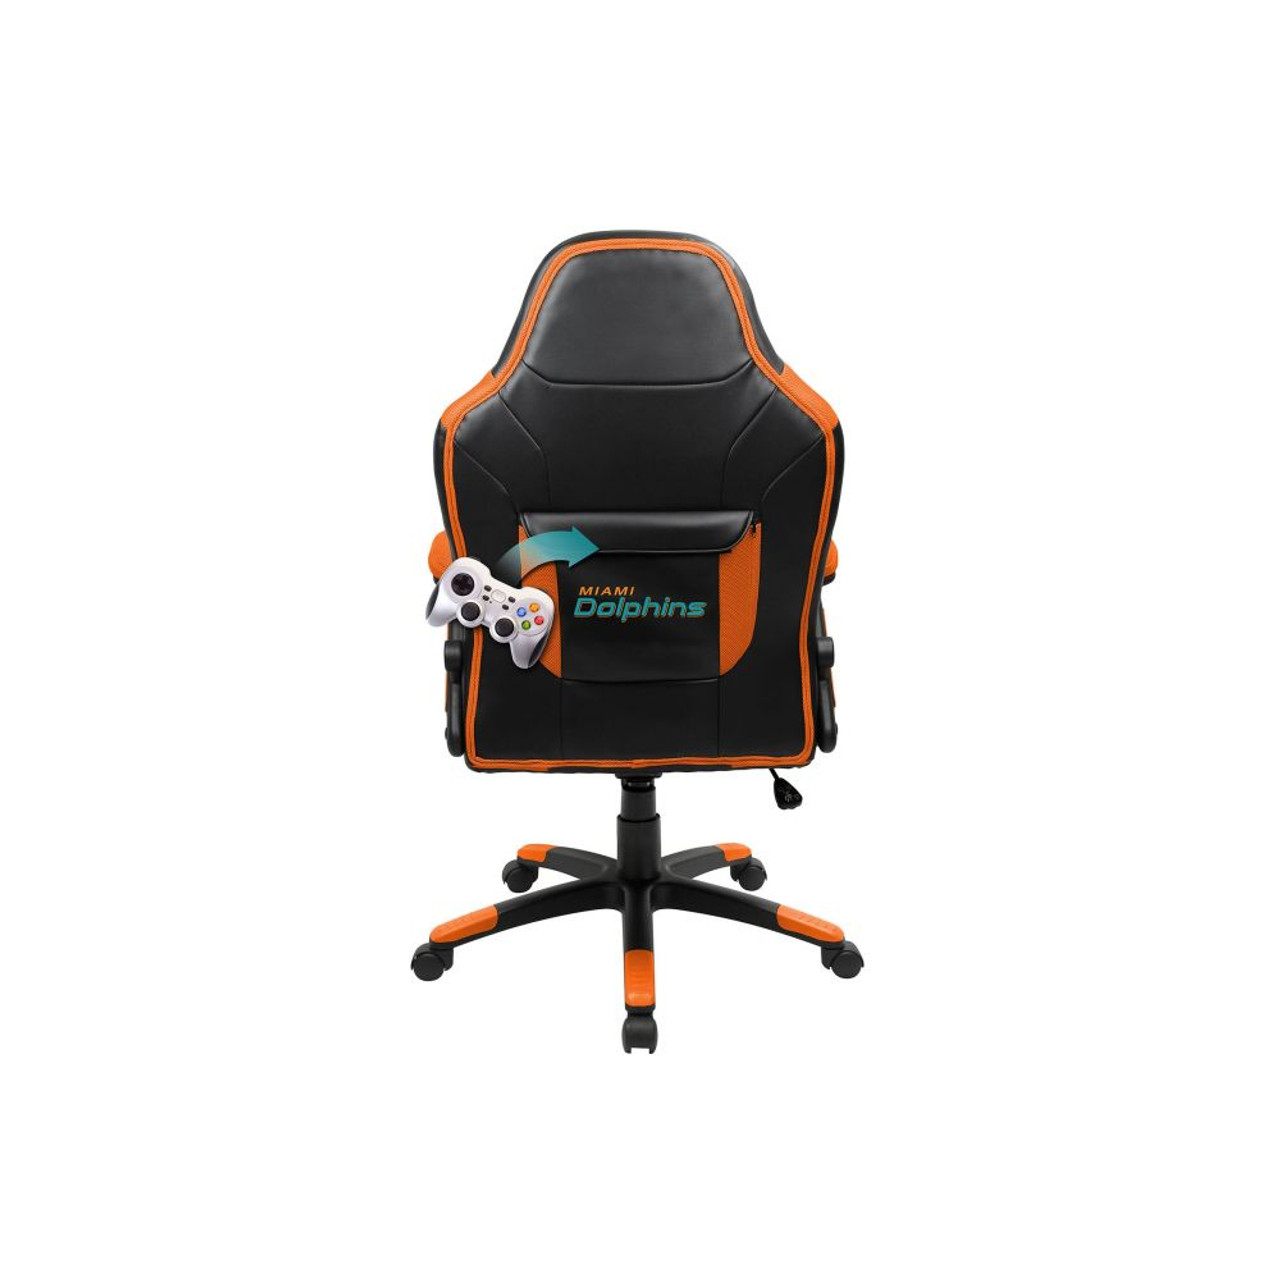 134-1008, Miami, Dolphins,  720801341088, Oversized, Video, Gaming, Chair, FREE SHIPPING, NFL, Logo, Imperial